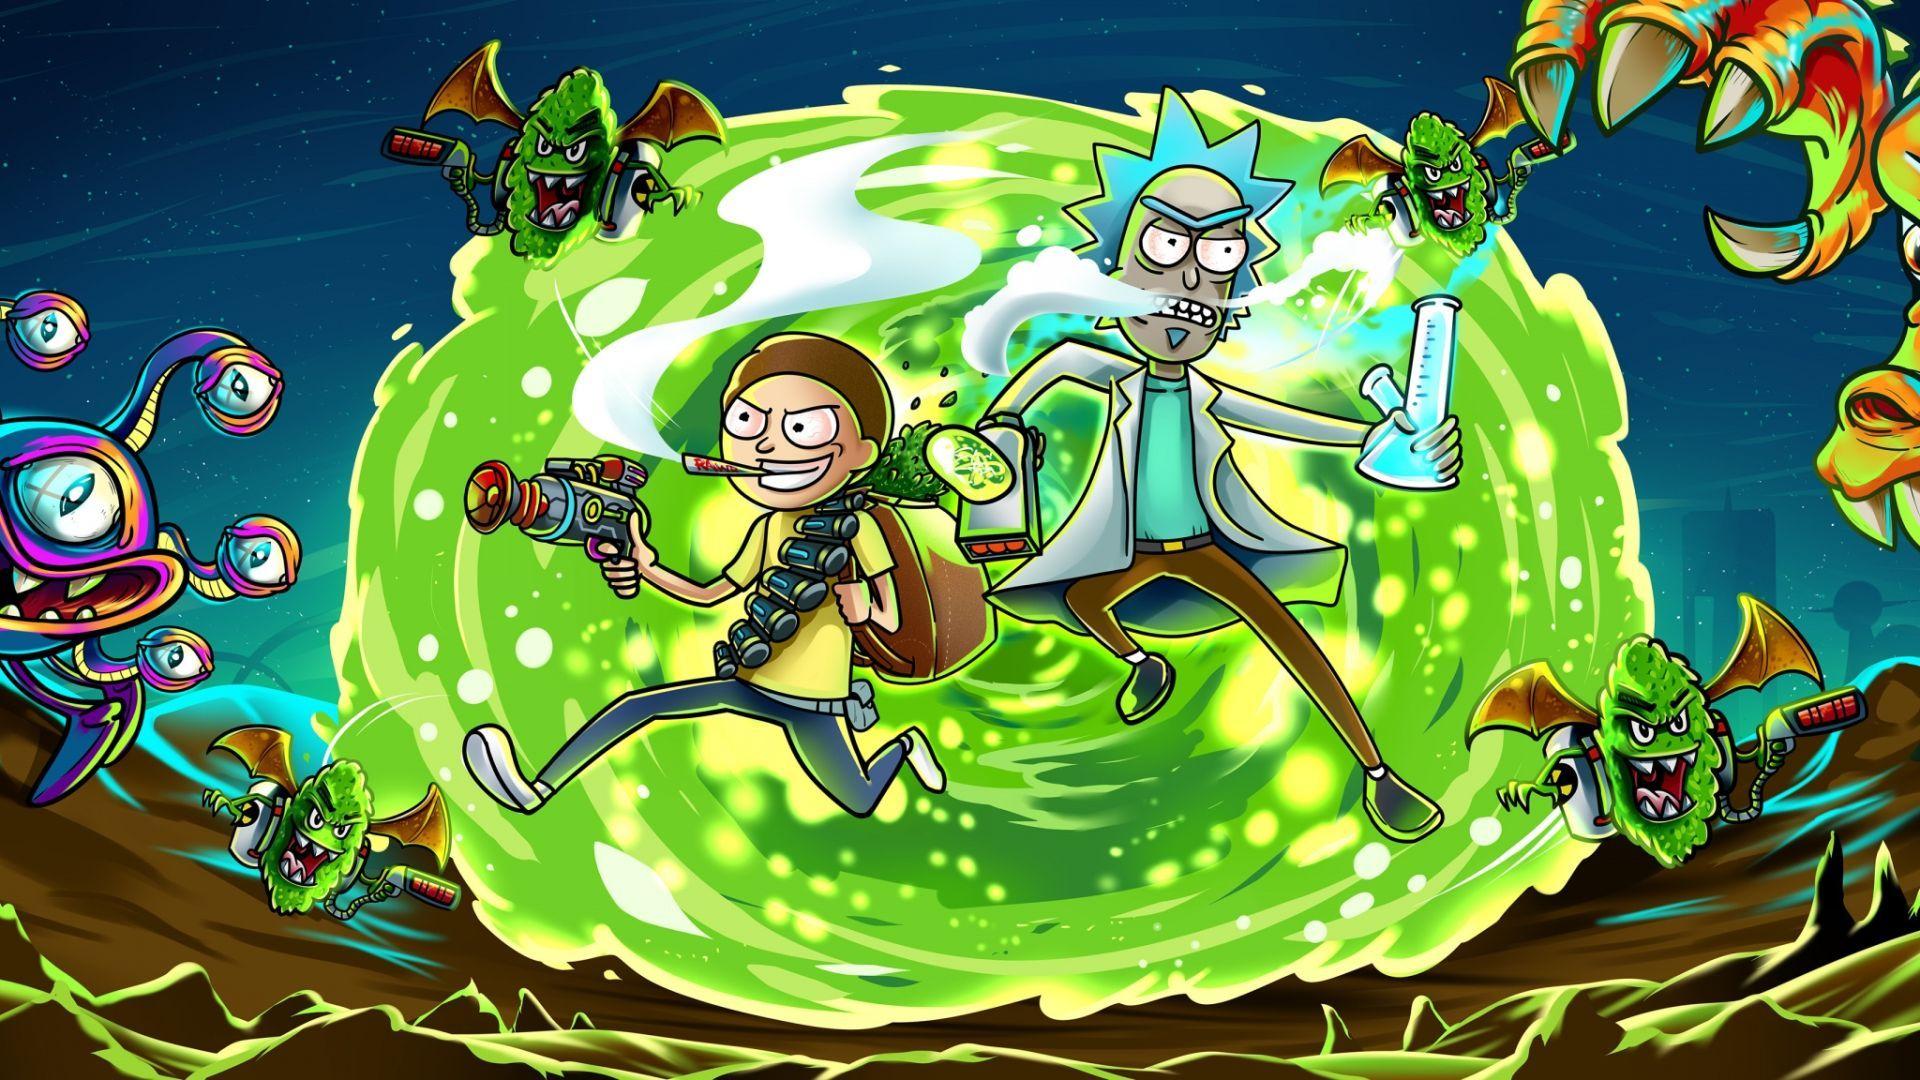 Rick and Morty Computer Wallpapers - Top Free Rick and Morty Computer